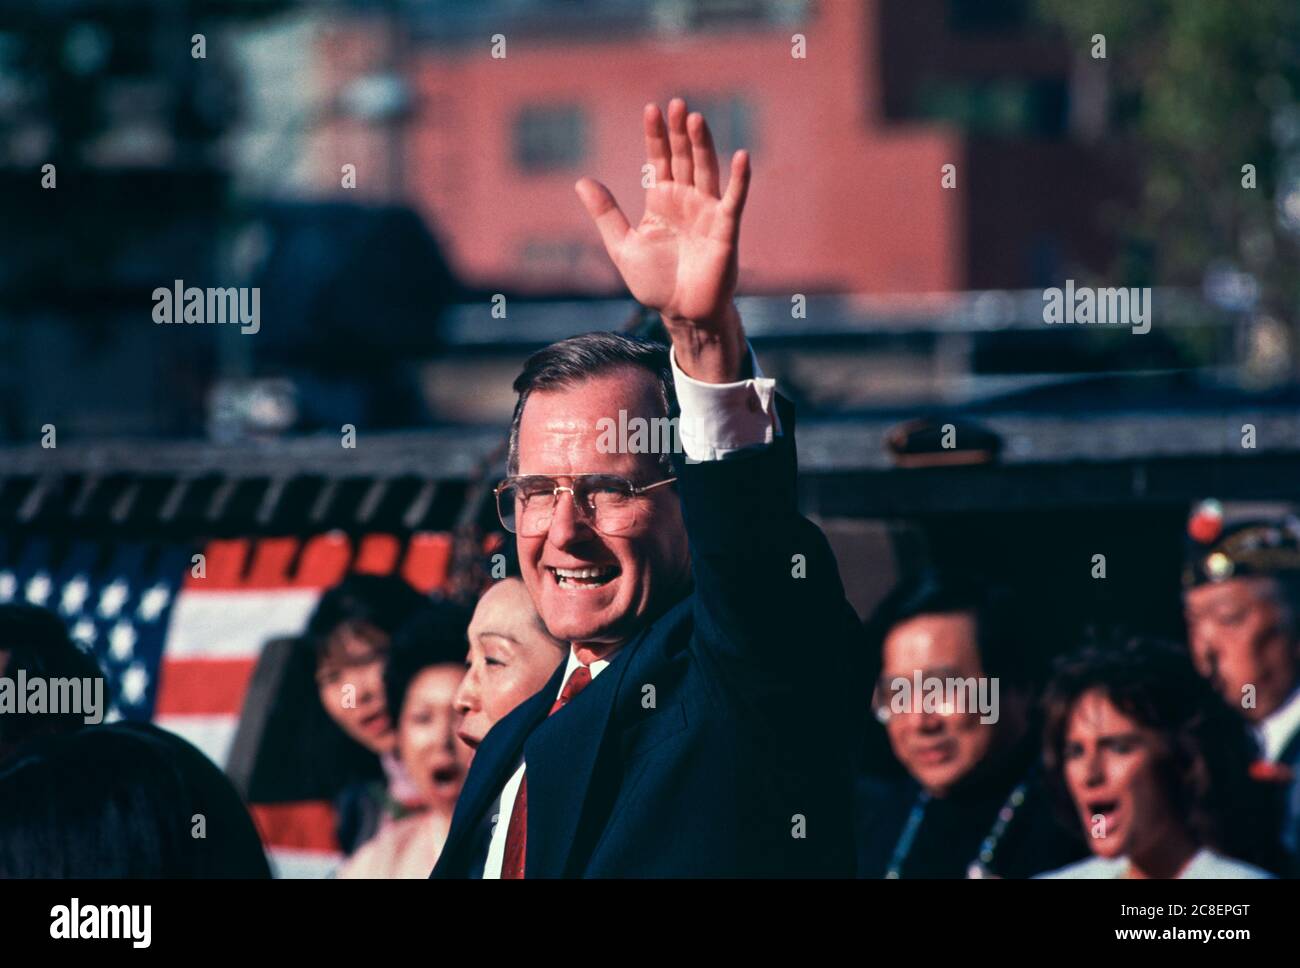 George Bush, George Herbert Walker Bush (1924-2018) In San Francisco Chinatown during his 1988 Presidential campaign. Republican, George H.W. Bush became the 41st President of the United States, 1989 to1993. Stock Photo